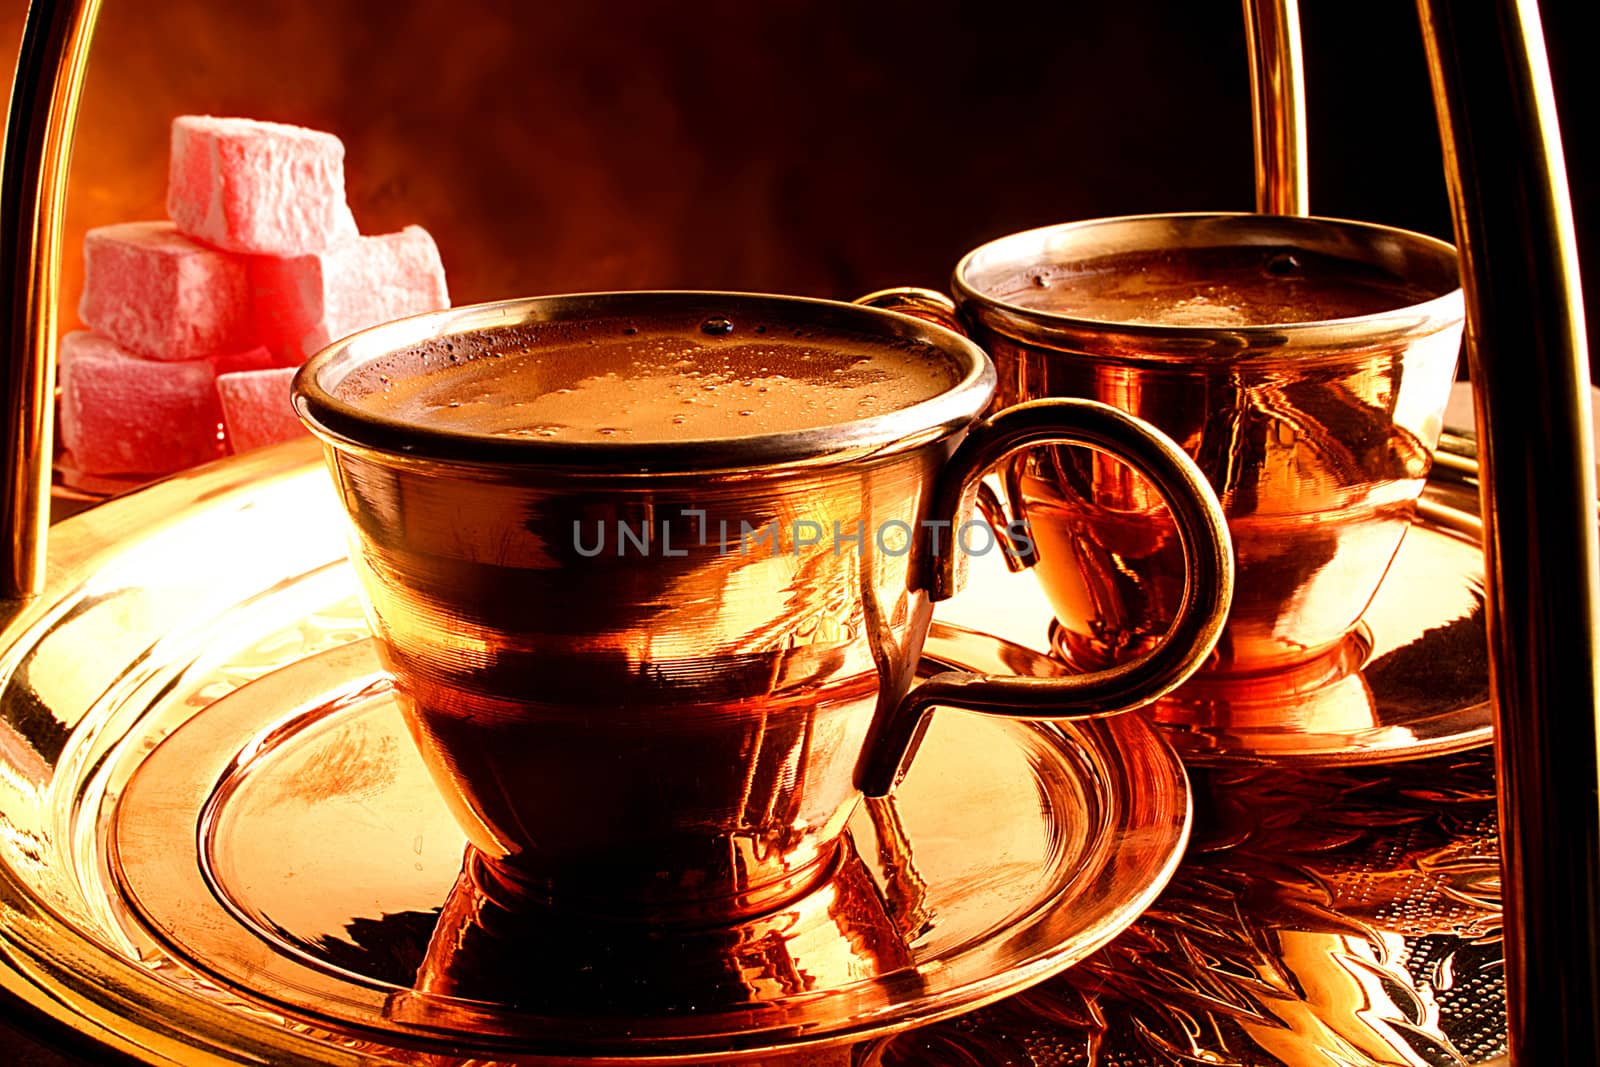 Two cups of turkish coffee on a tray with traditional delicacy on the side.